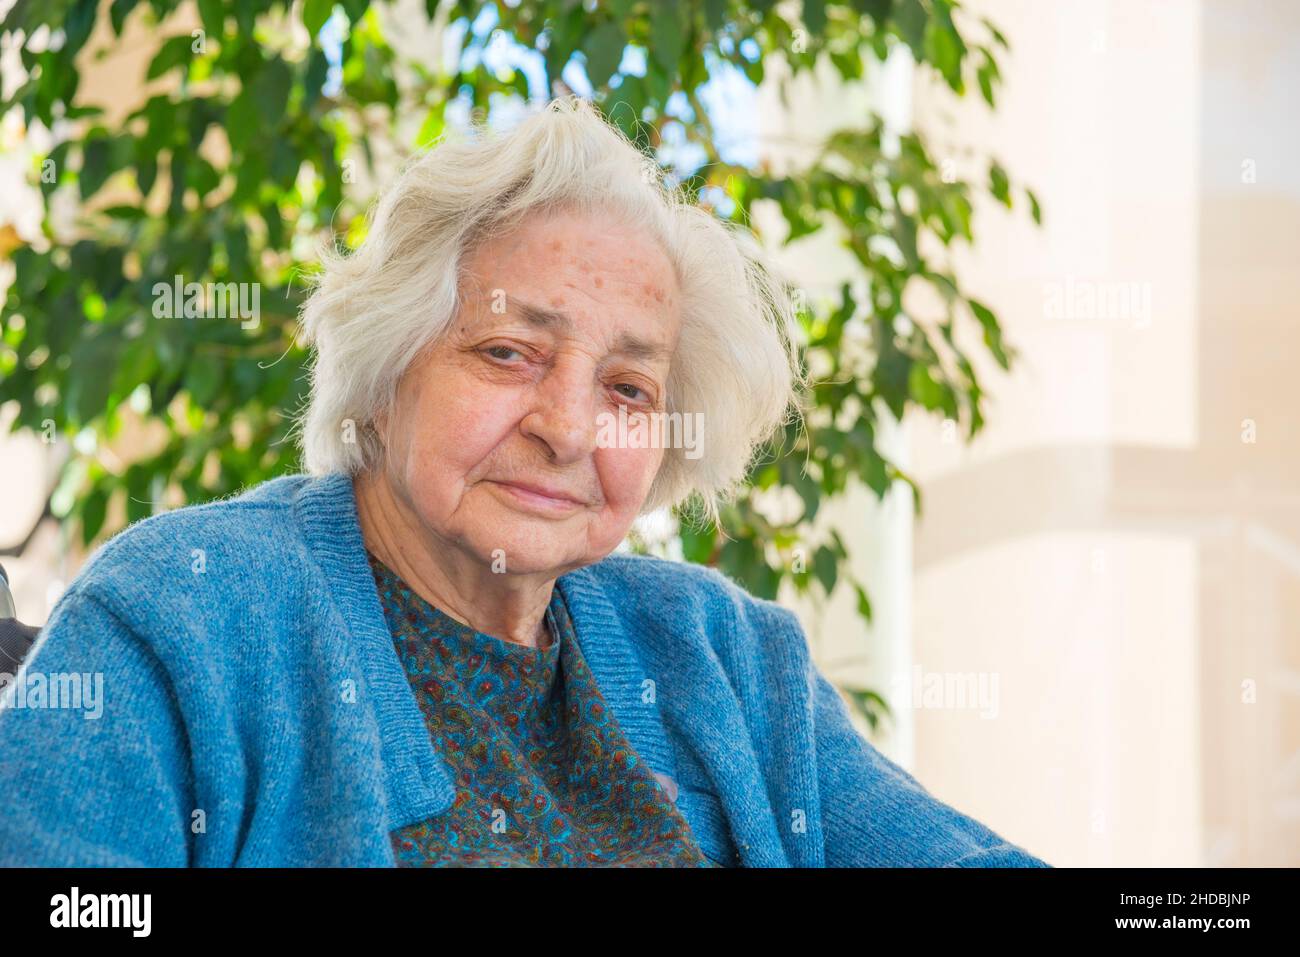 Portrait of old lady smiling and looking at the camera. Stock Photo